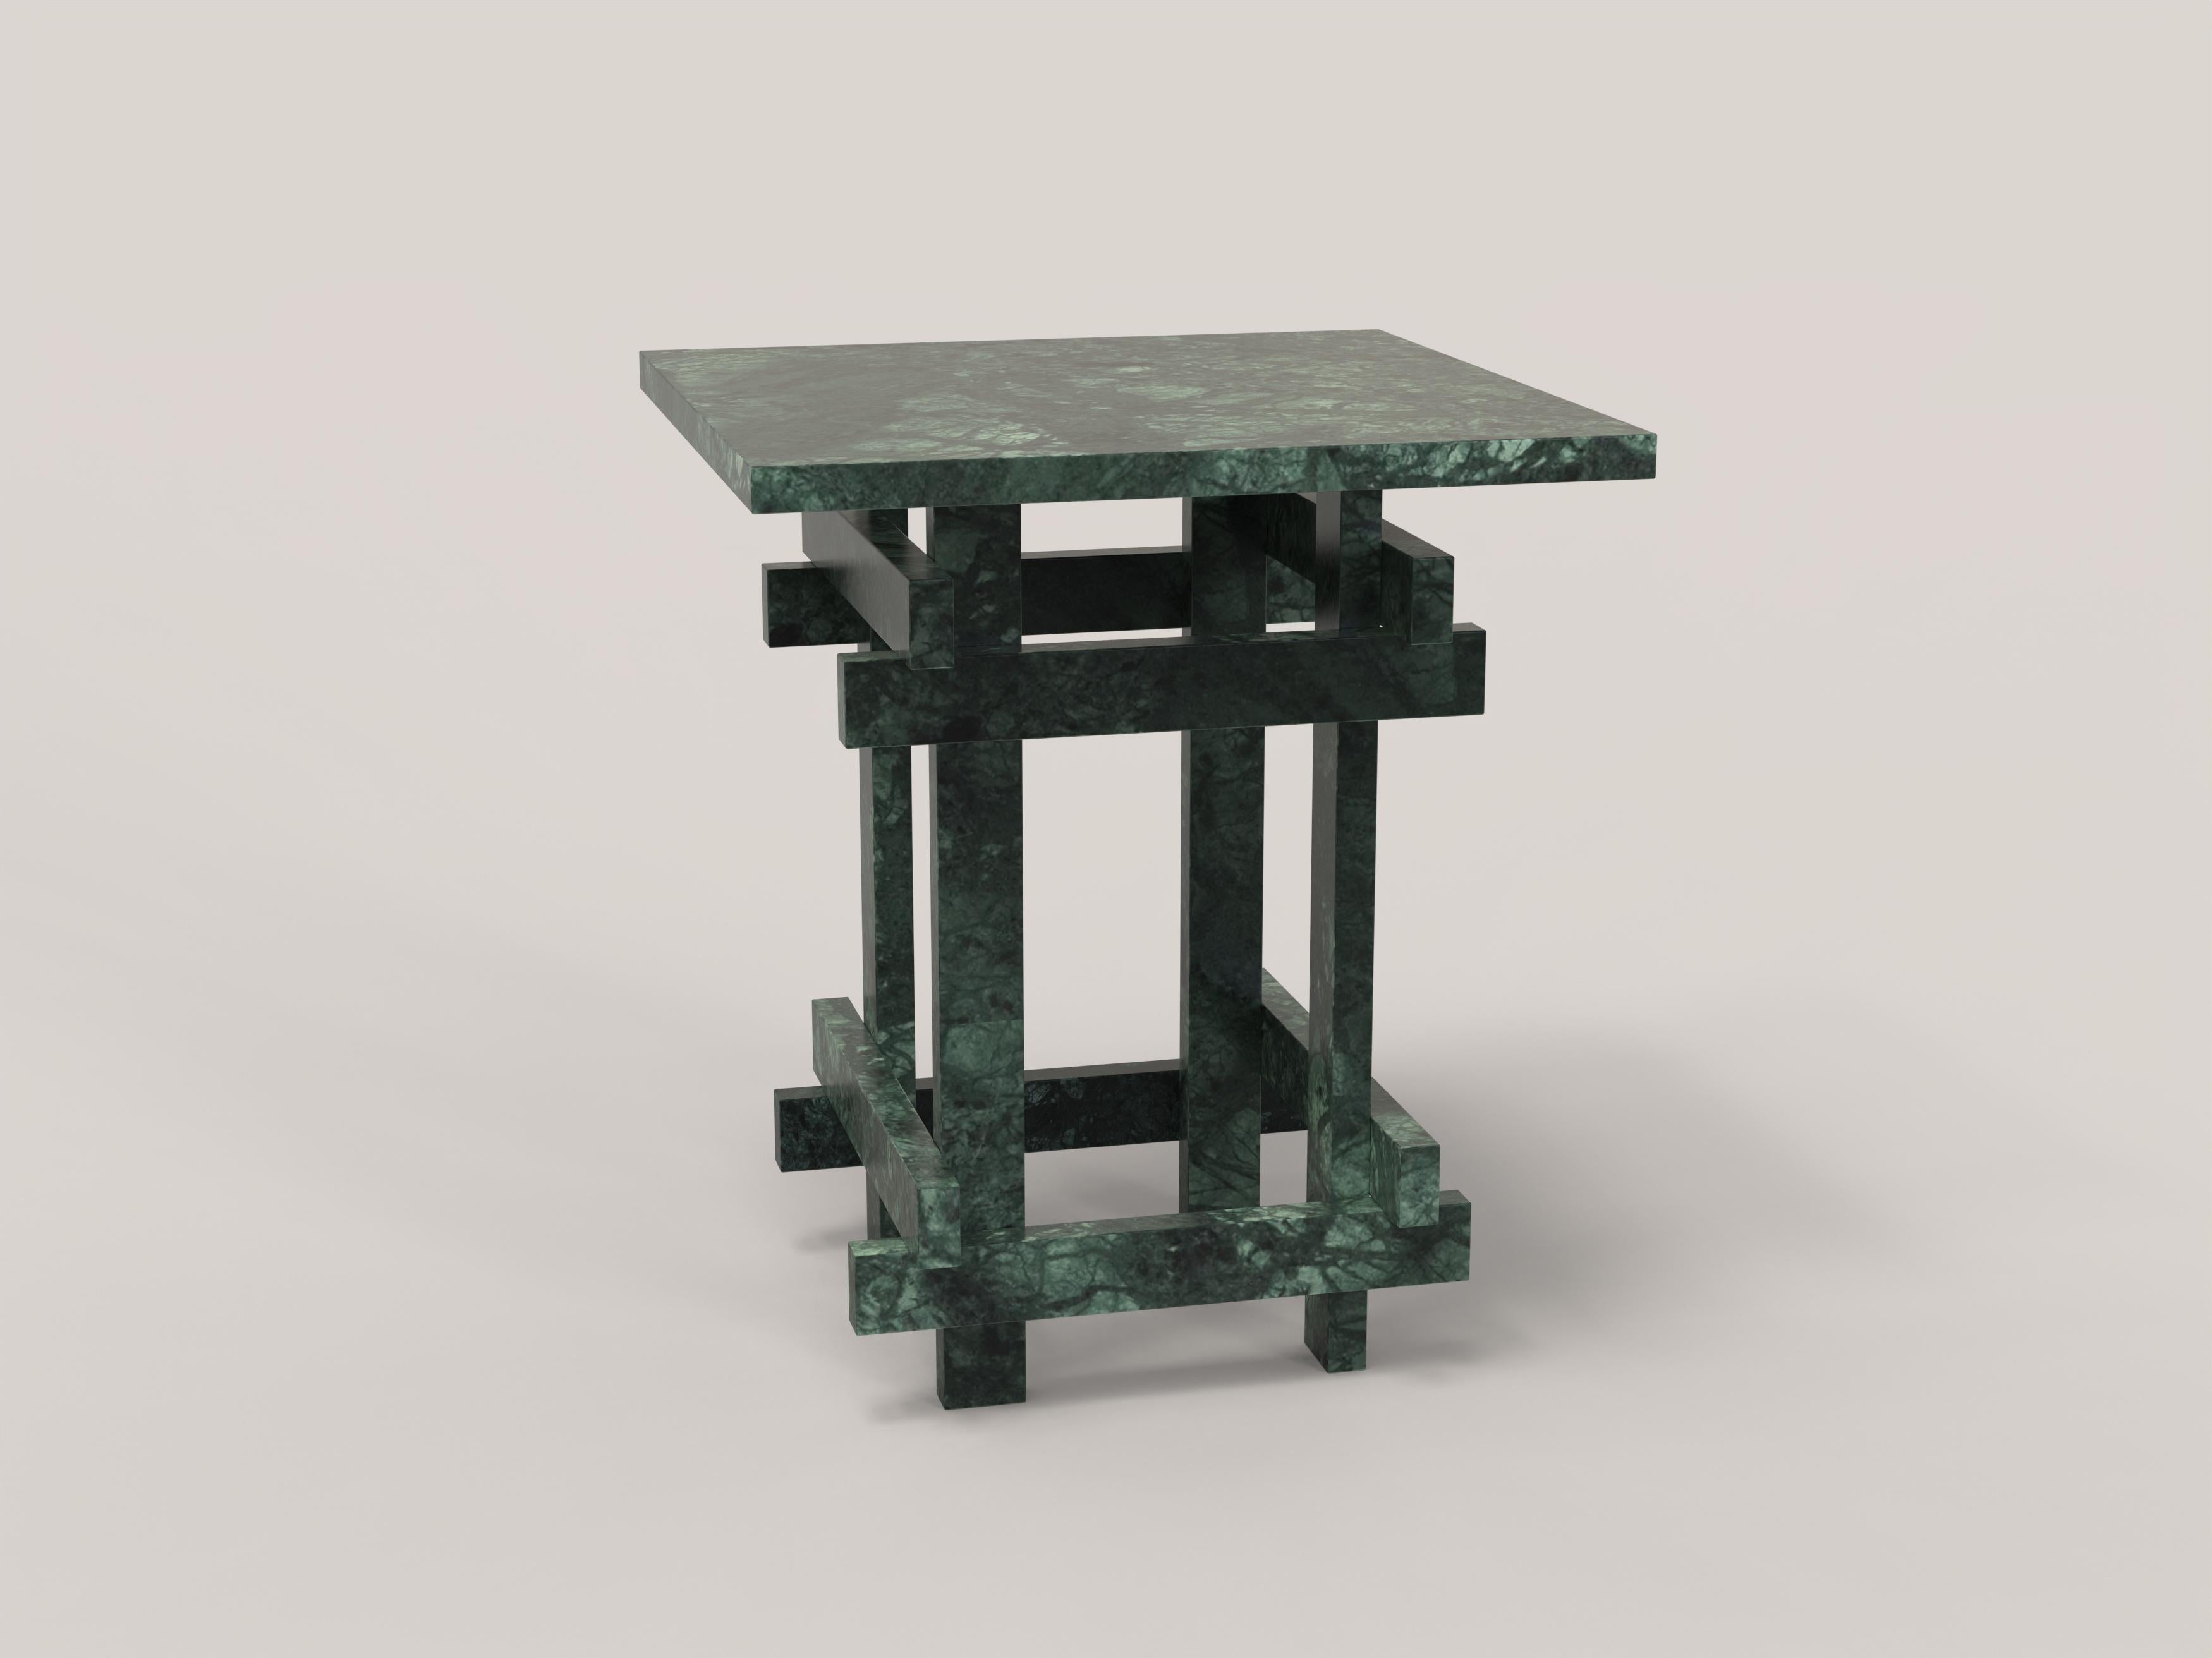 Contemporary LimitedEdition Green Marble Table, Paranoid V1 by Edizione Limitata For Sale 4